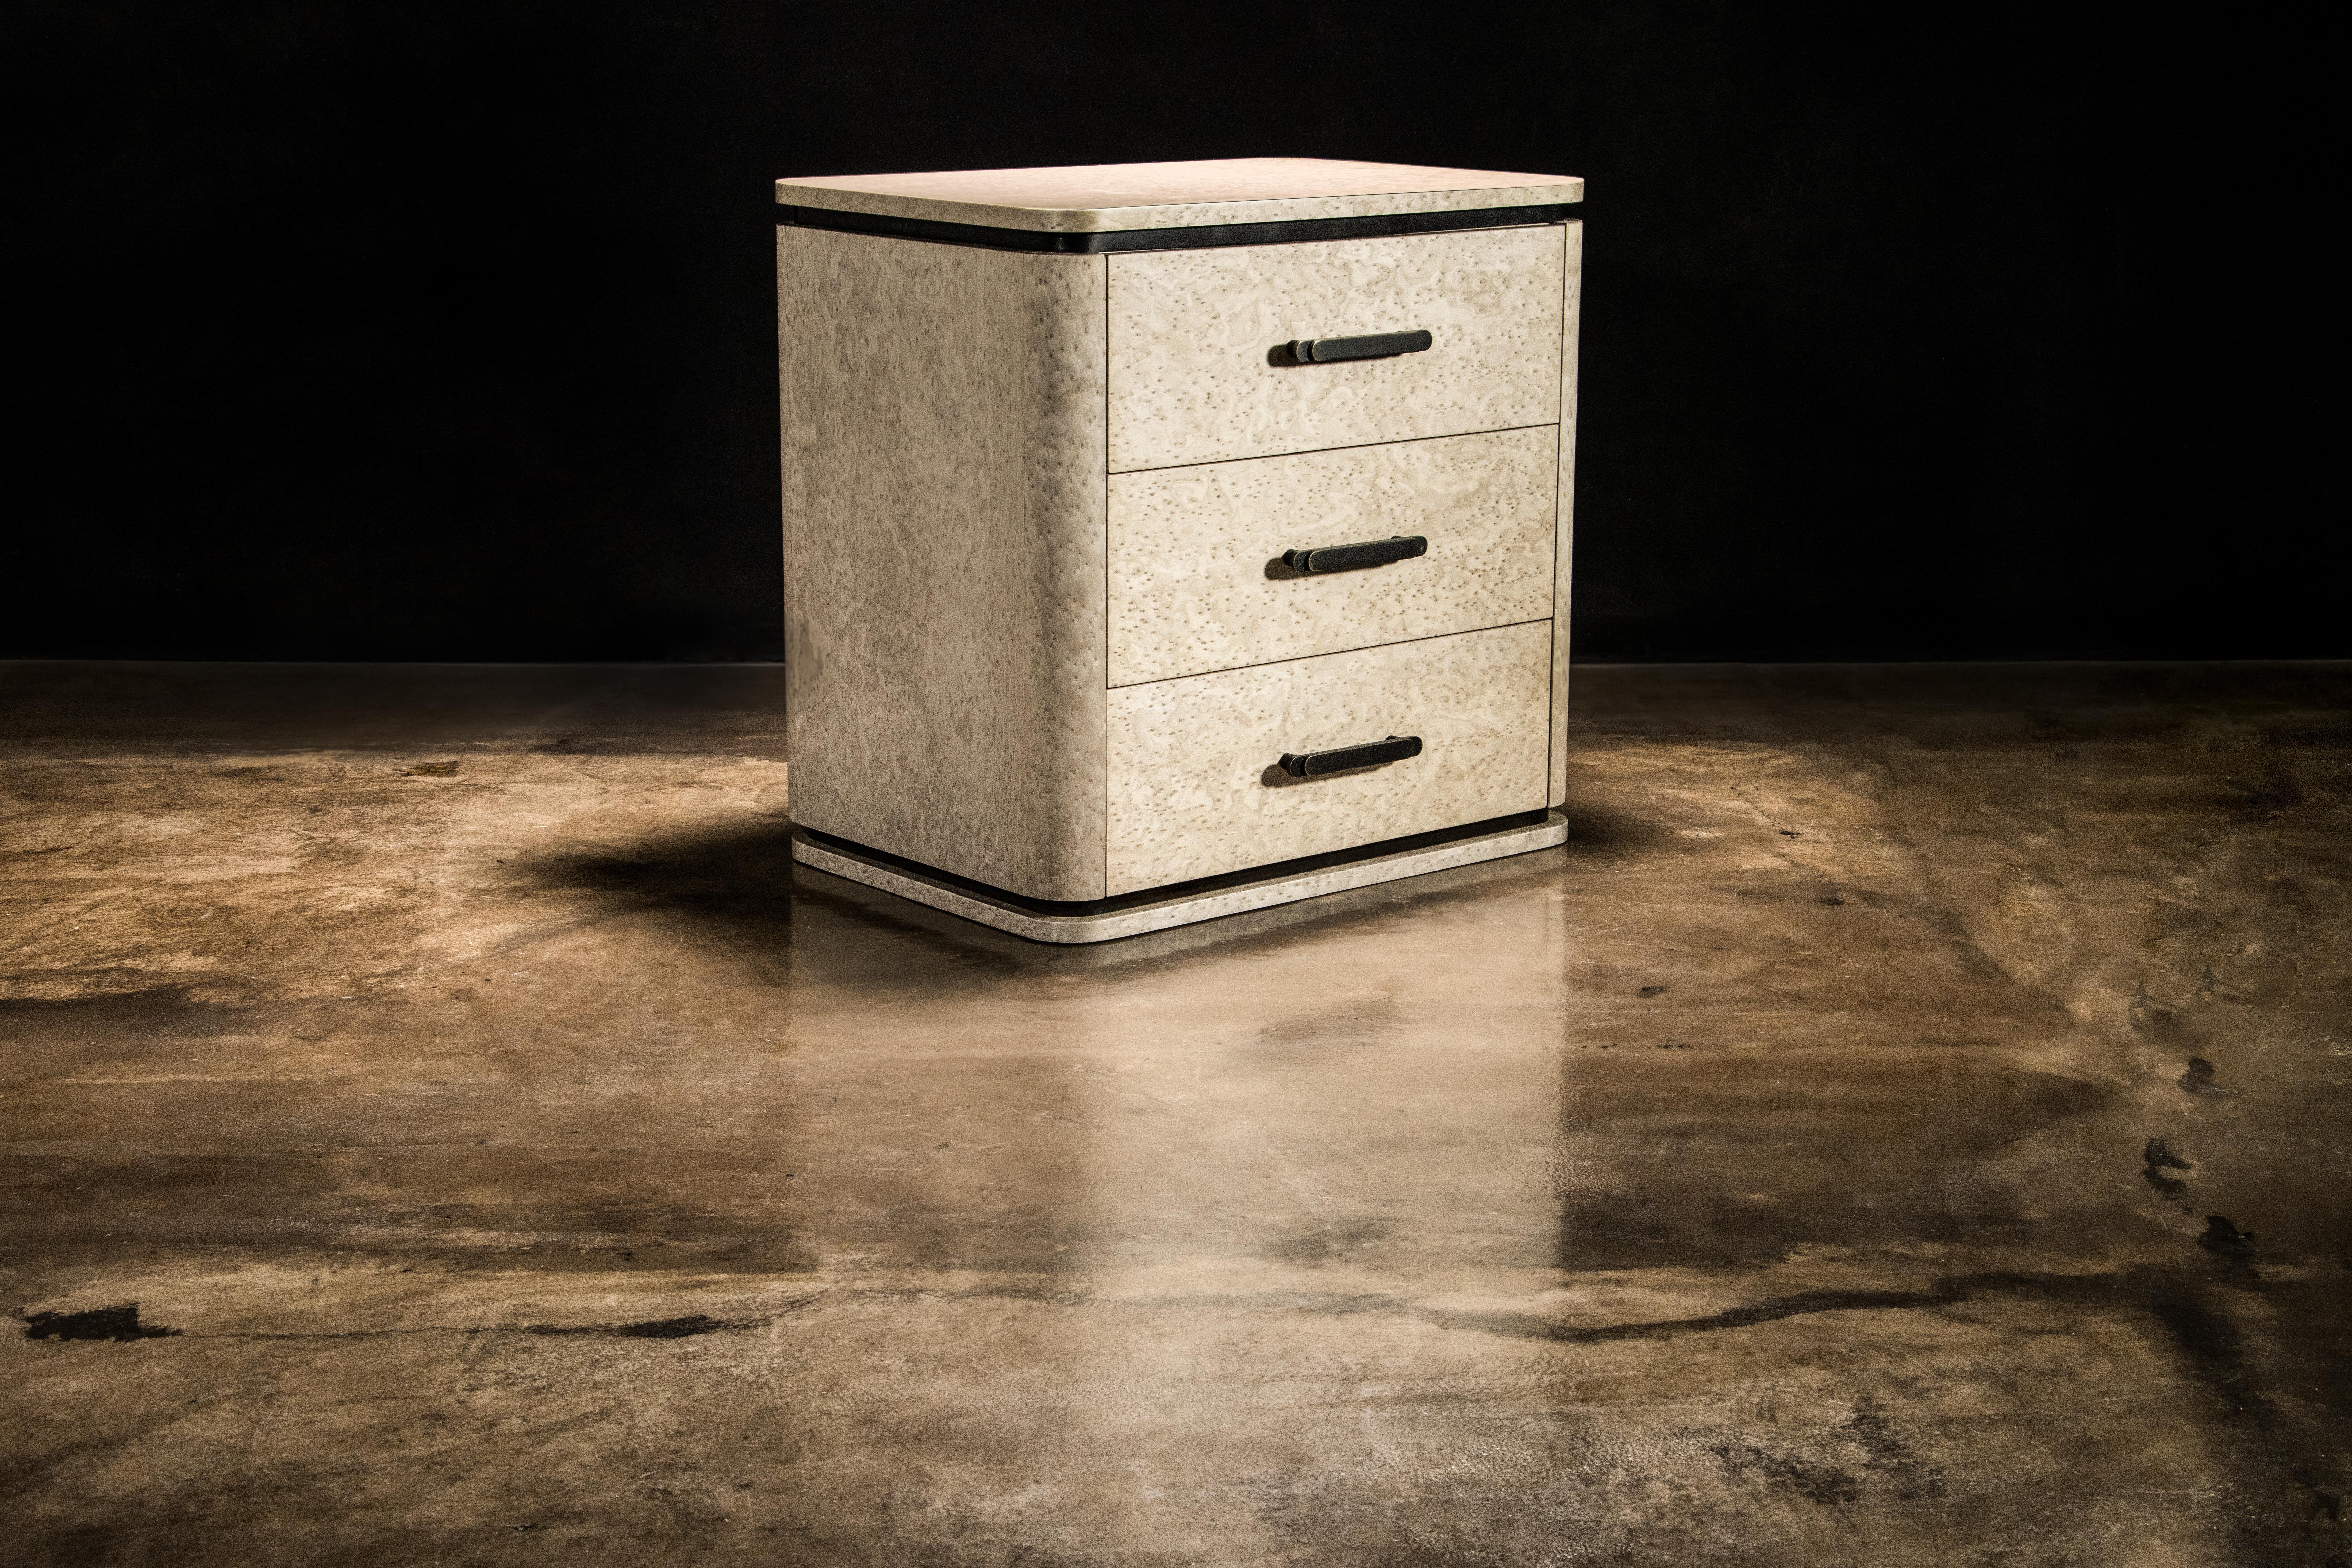 Elena Modern Bedside Table, shown in Gray Birdseye Maple & Bronze pulls from Costantini

Measurements are 25.5